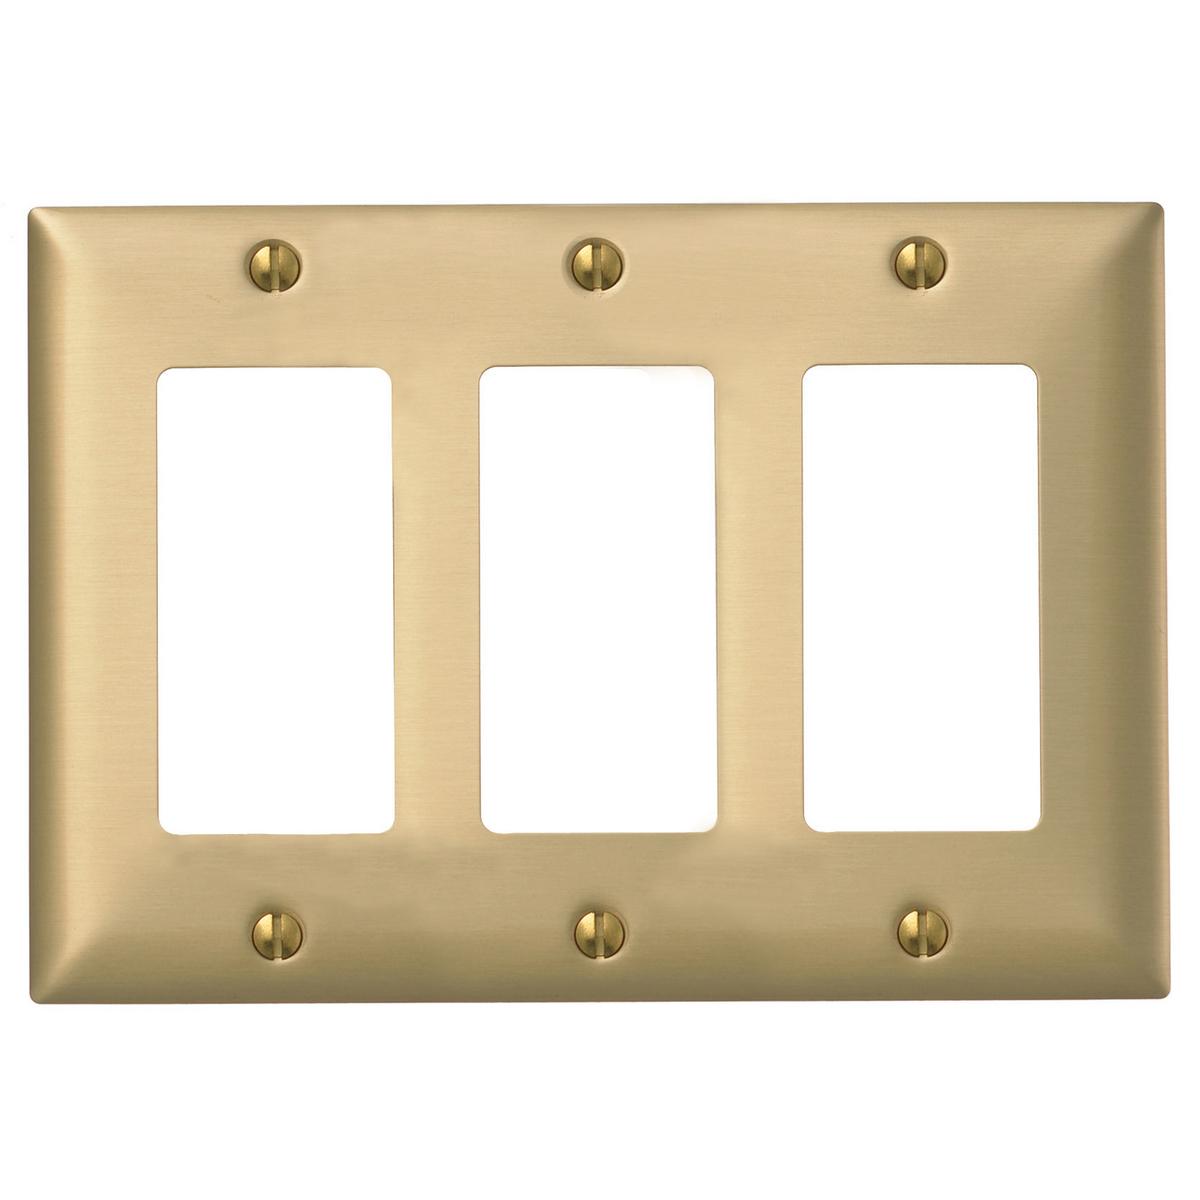 Hubbell SBP263 Wallplates and Boxes, Metallic Plates, 3- Gang, 3) Decorator Openings, Standard Size, Brass Plated Steel  ; Provides a plush appearance with the durability of metal ; Finish is lacquer coated to inhibit oxidation ; Protective plastic film helps to prevent